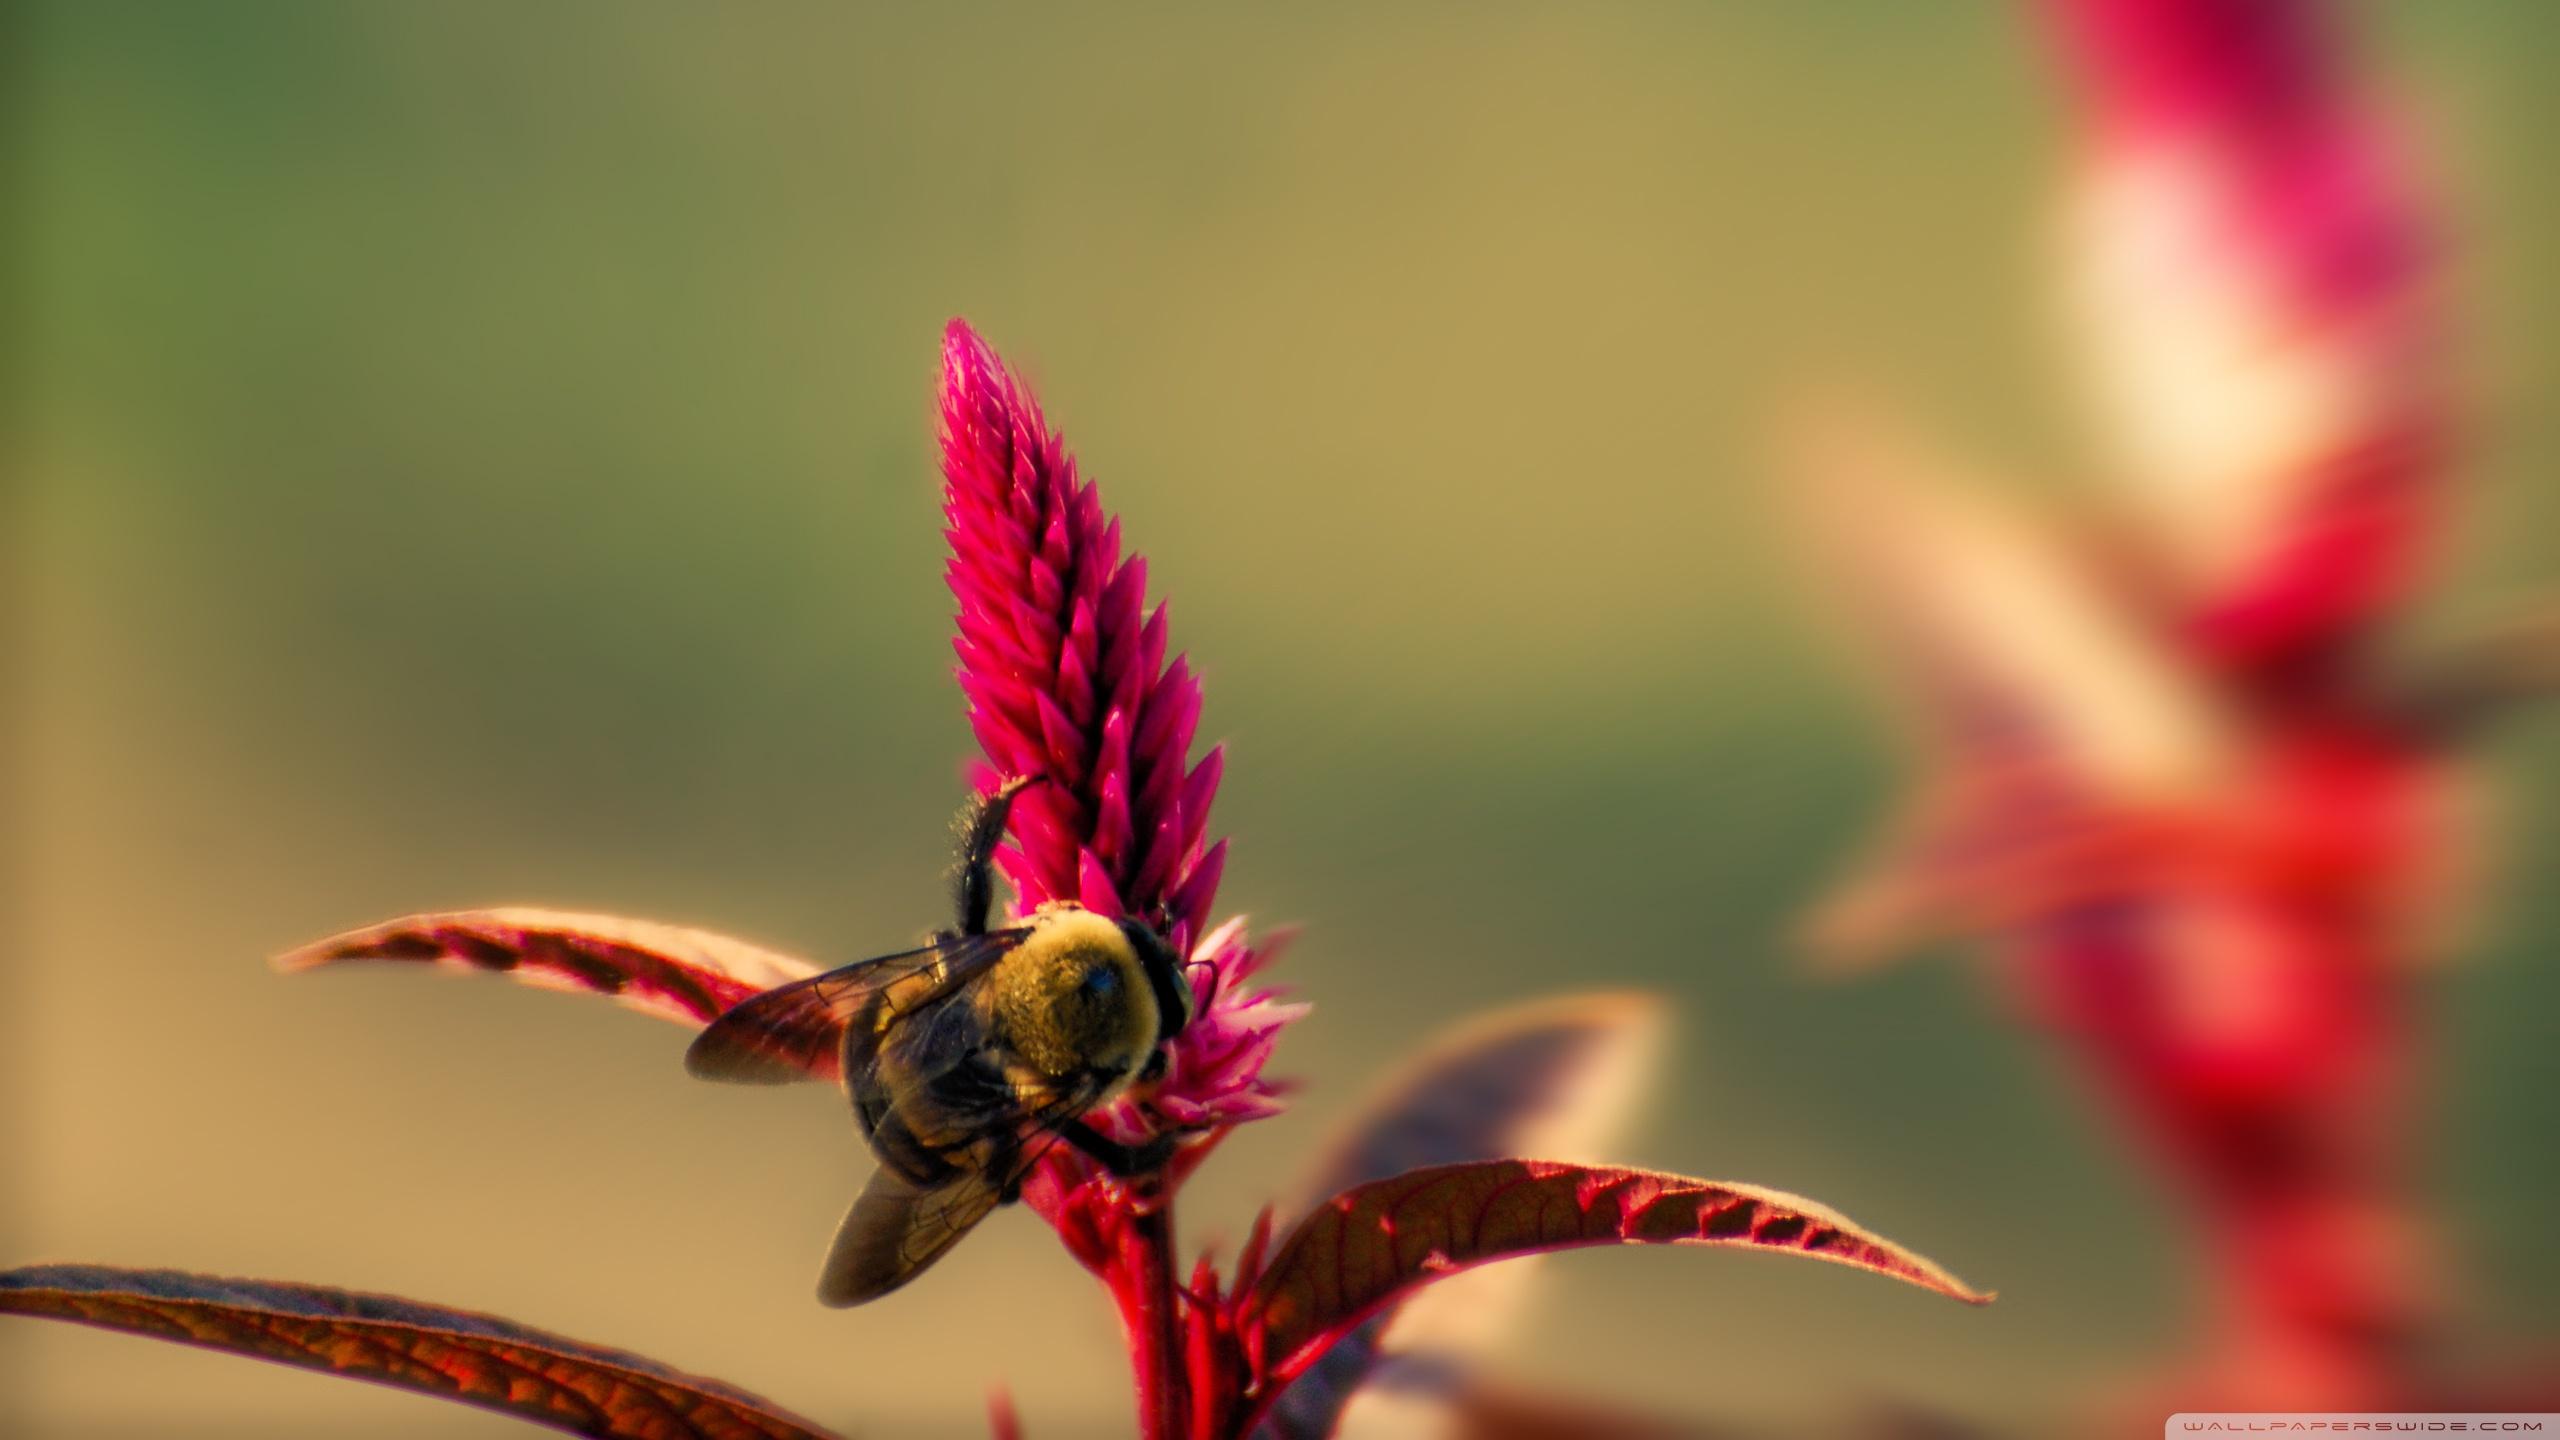 Bumble Bee Insect Ultra 2K Desk 4K Backgrounds Wallpapers for